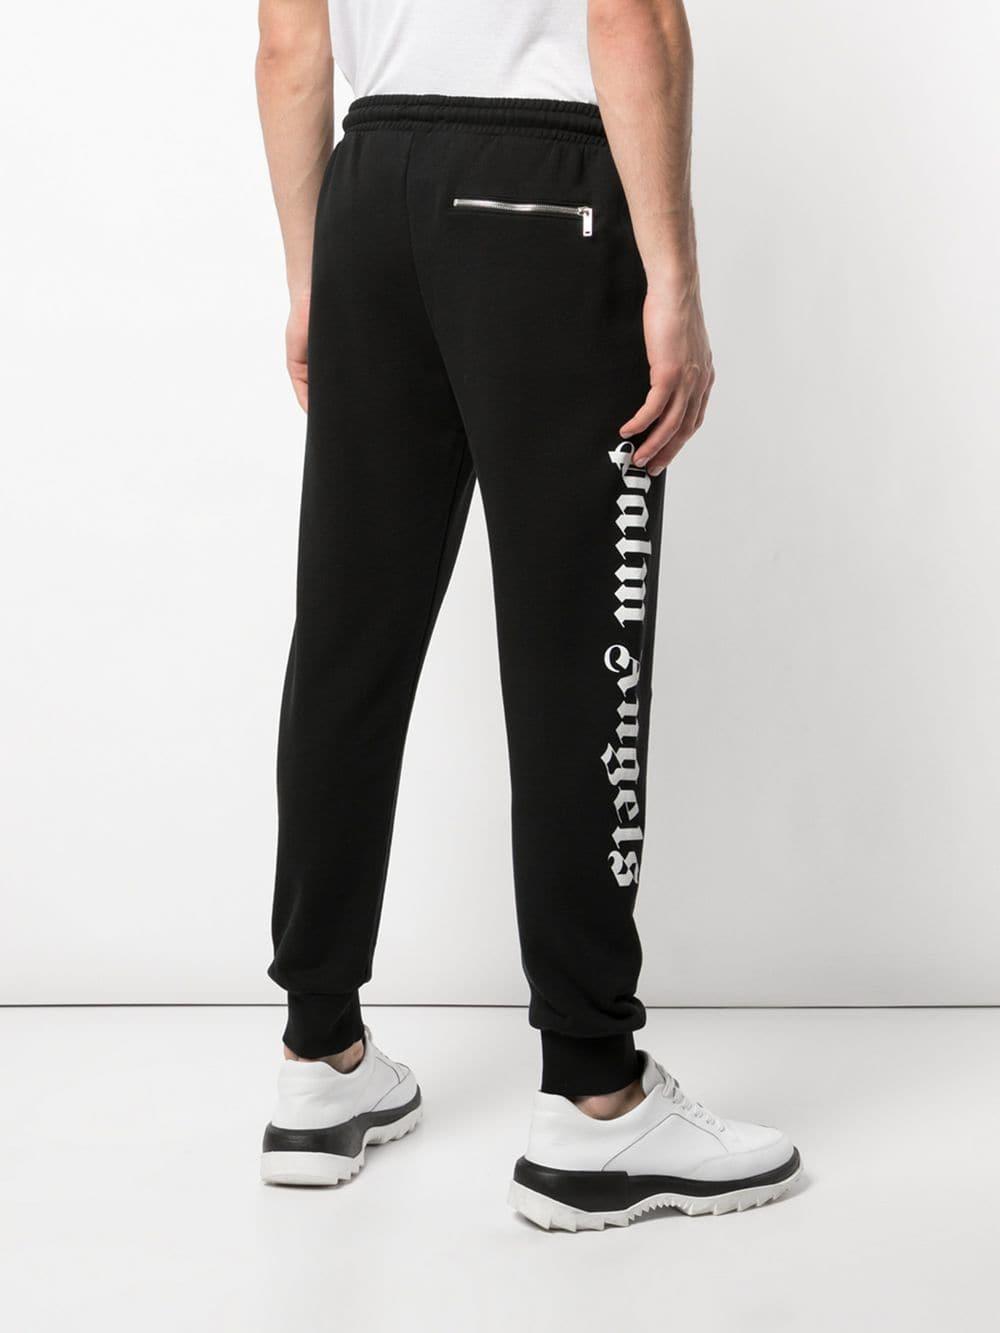 Palm Angels Cotton Side Logo Print joggers in Black for Men - Lyst